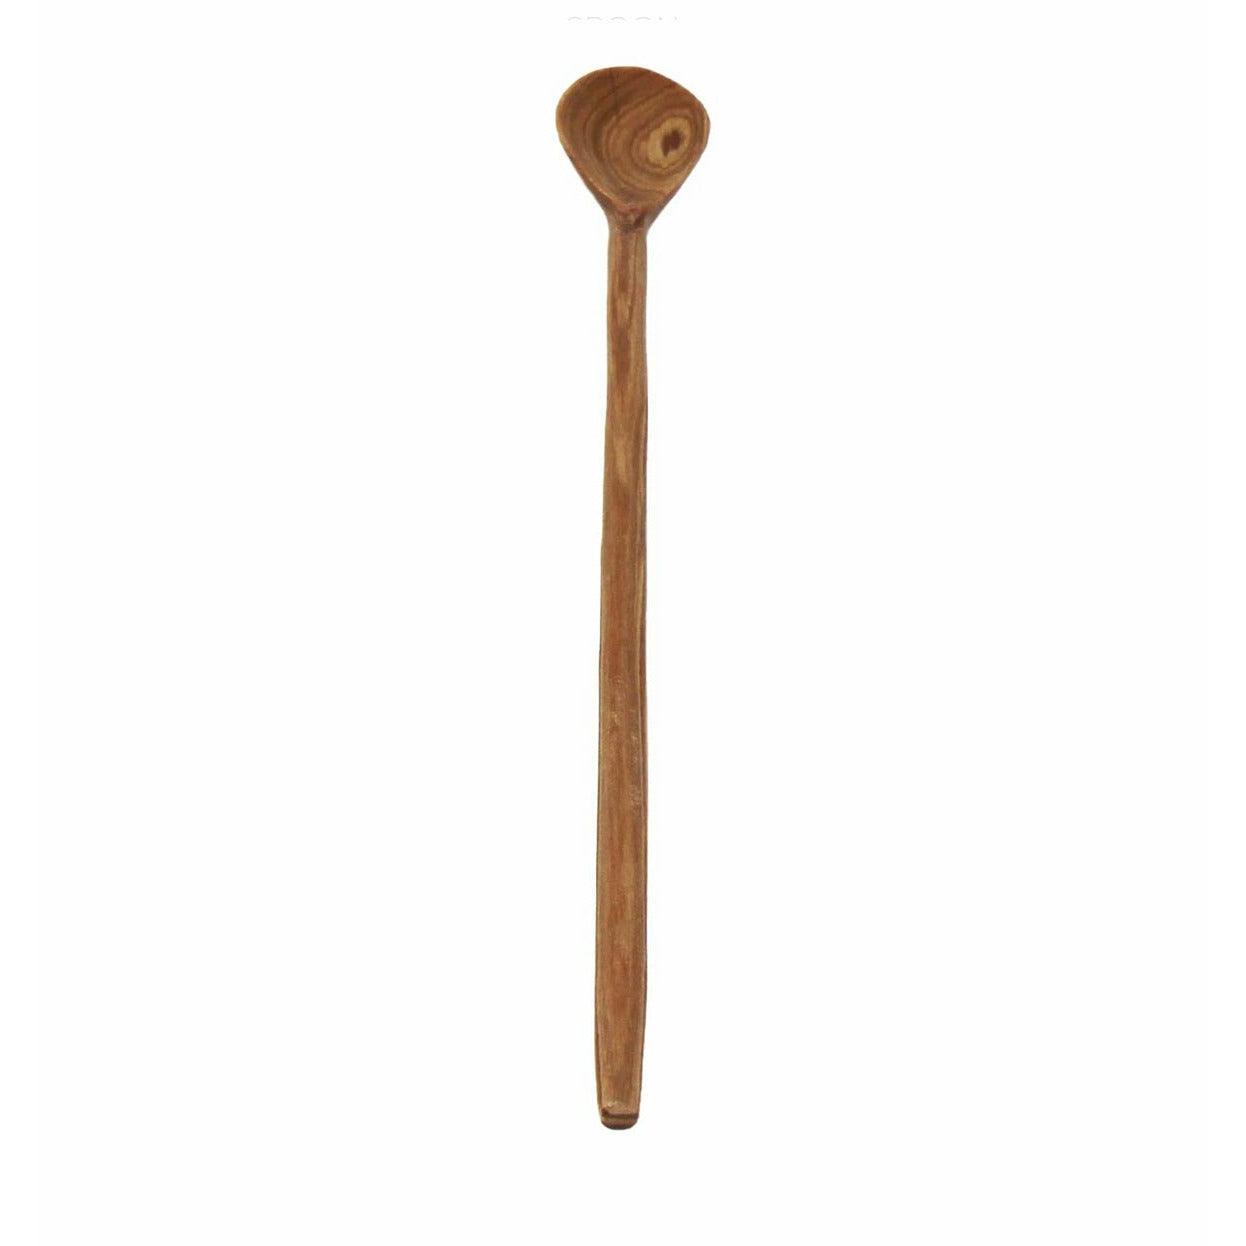 Iced Tea Spoon | Hand-carved Olive Wood Long Spoon - Ninth & Pine